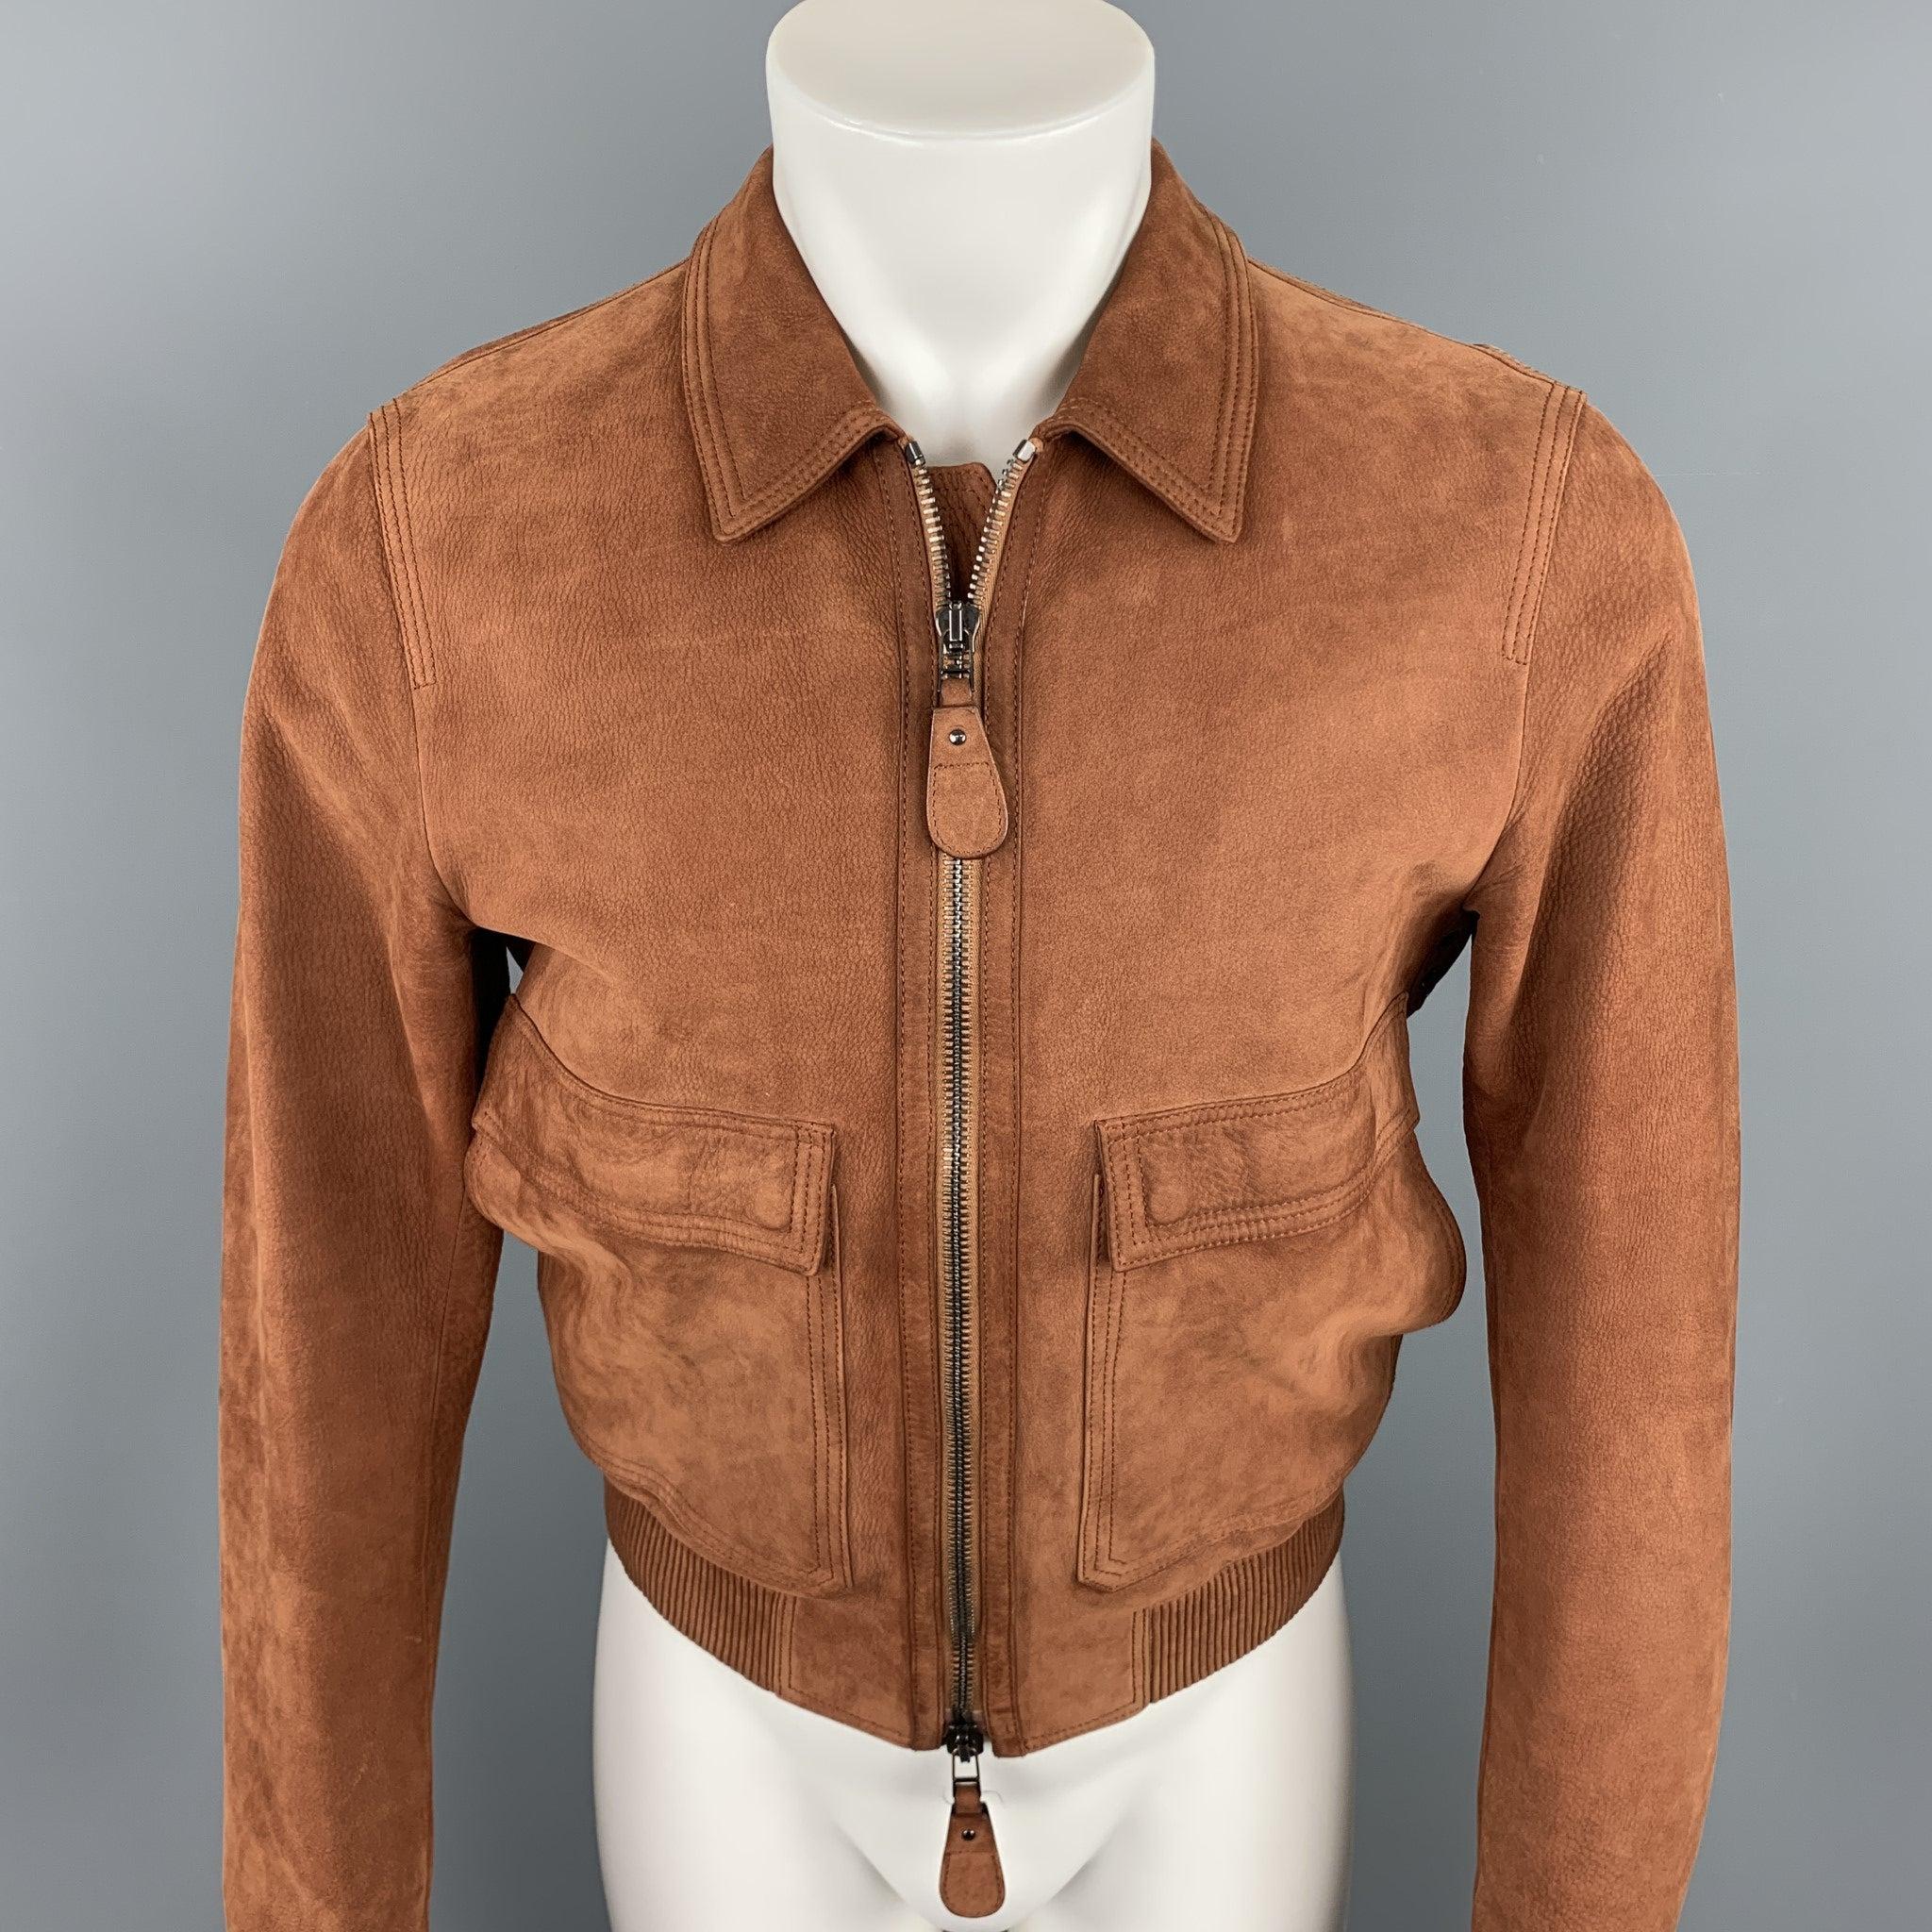 BURBERRY LONDON Chest Size 38 Brick Solid Zip Up Nubuck Leather Jacket In Good Condition For Sale In San Francisco, CA